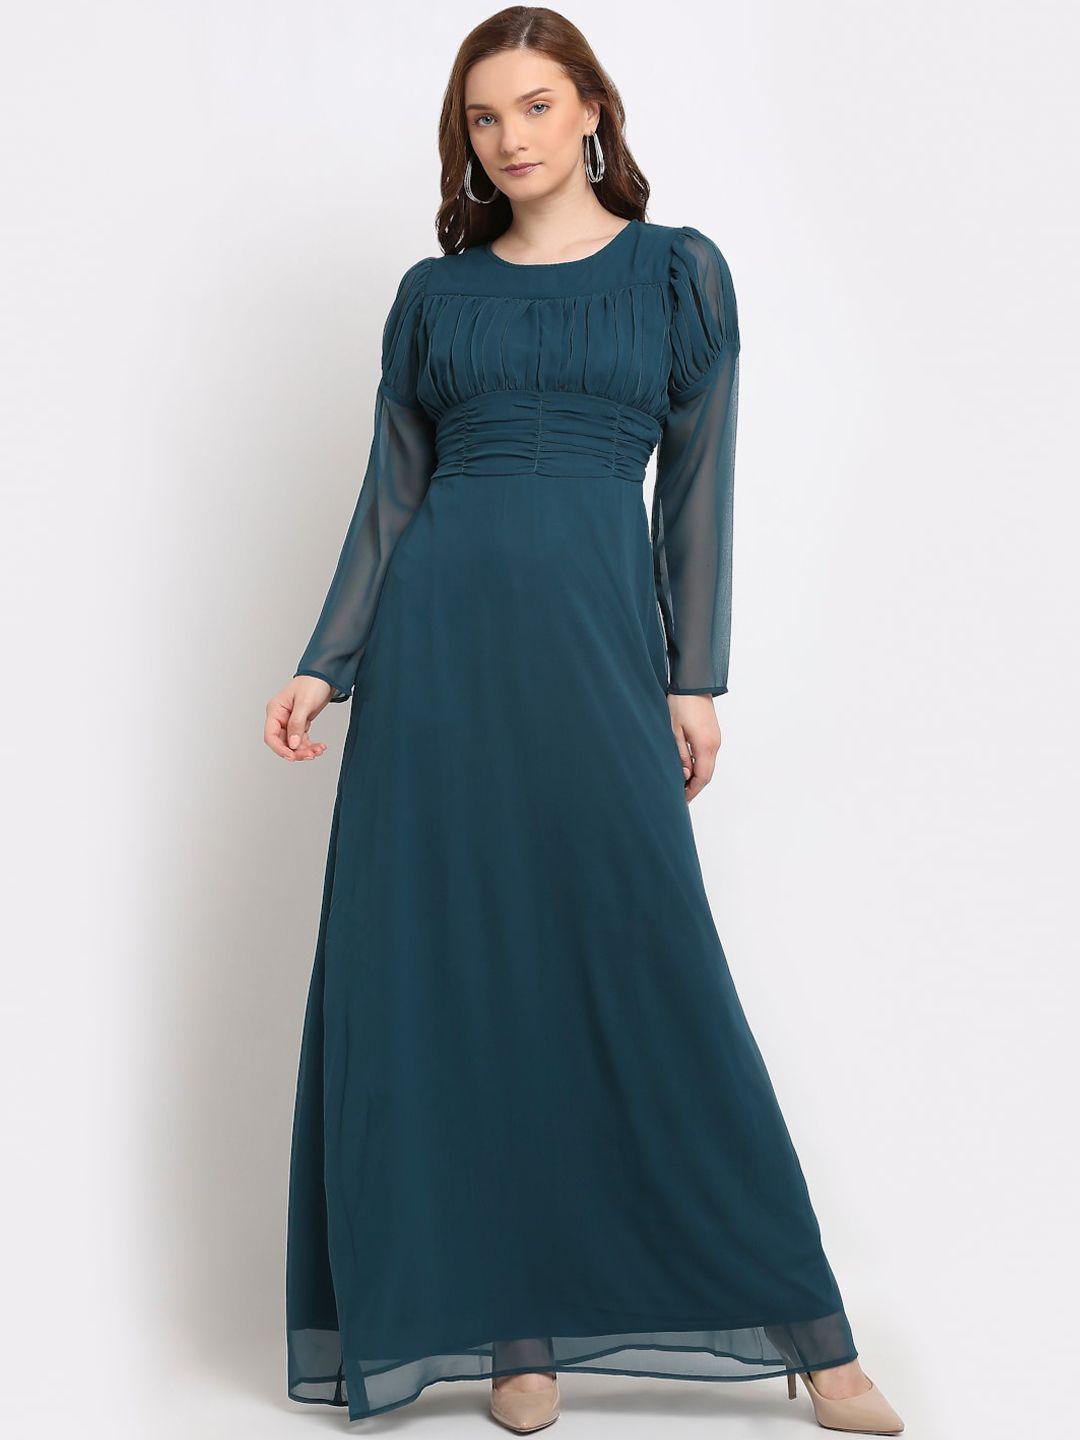 la-zoire-turquoise-blue-solid-georgette-maxi-dress-with-gathered-detailing